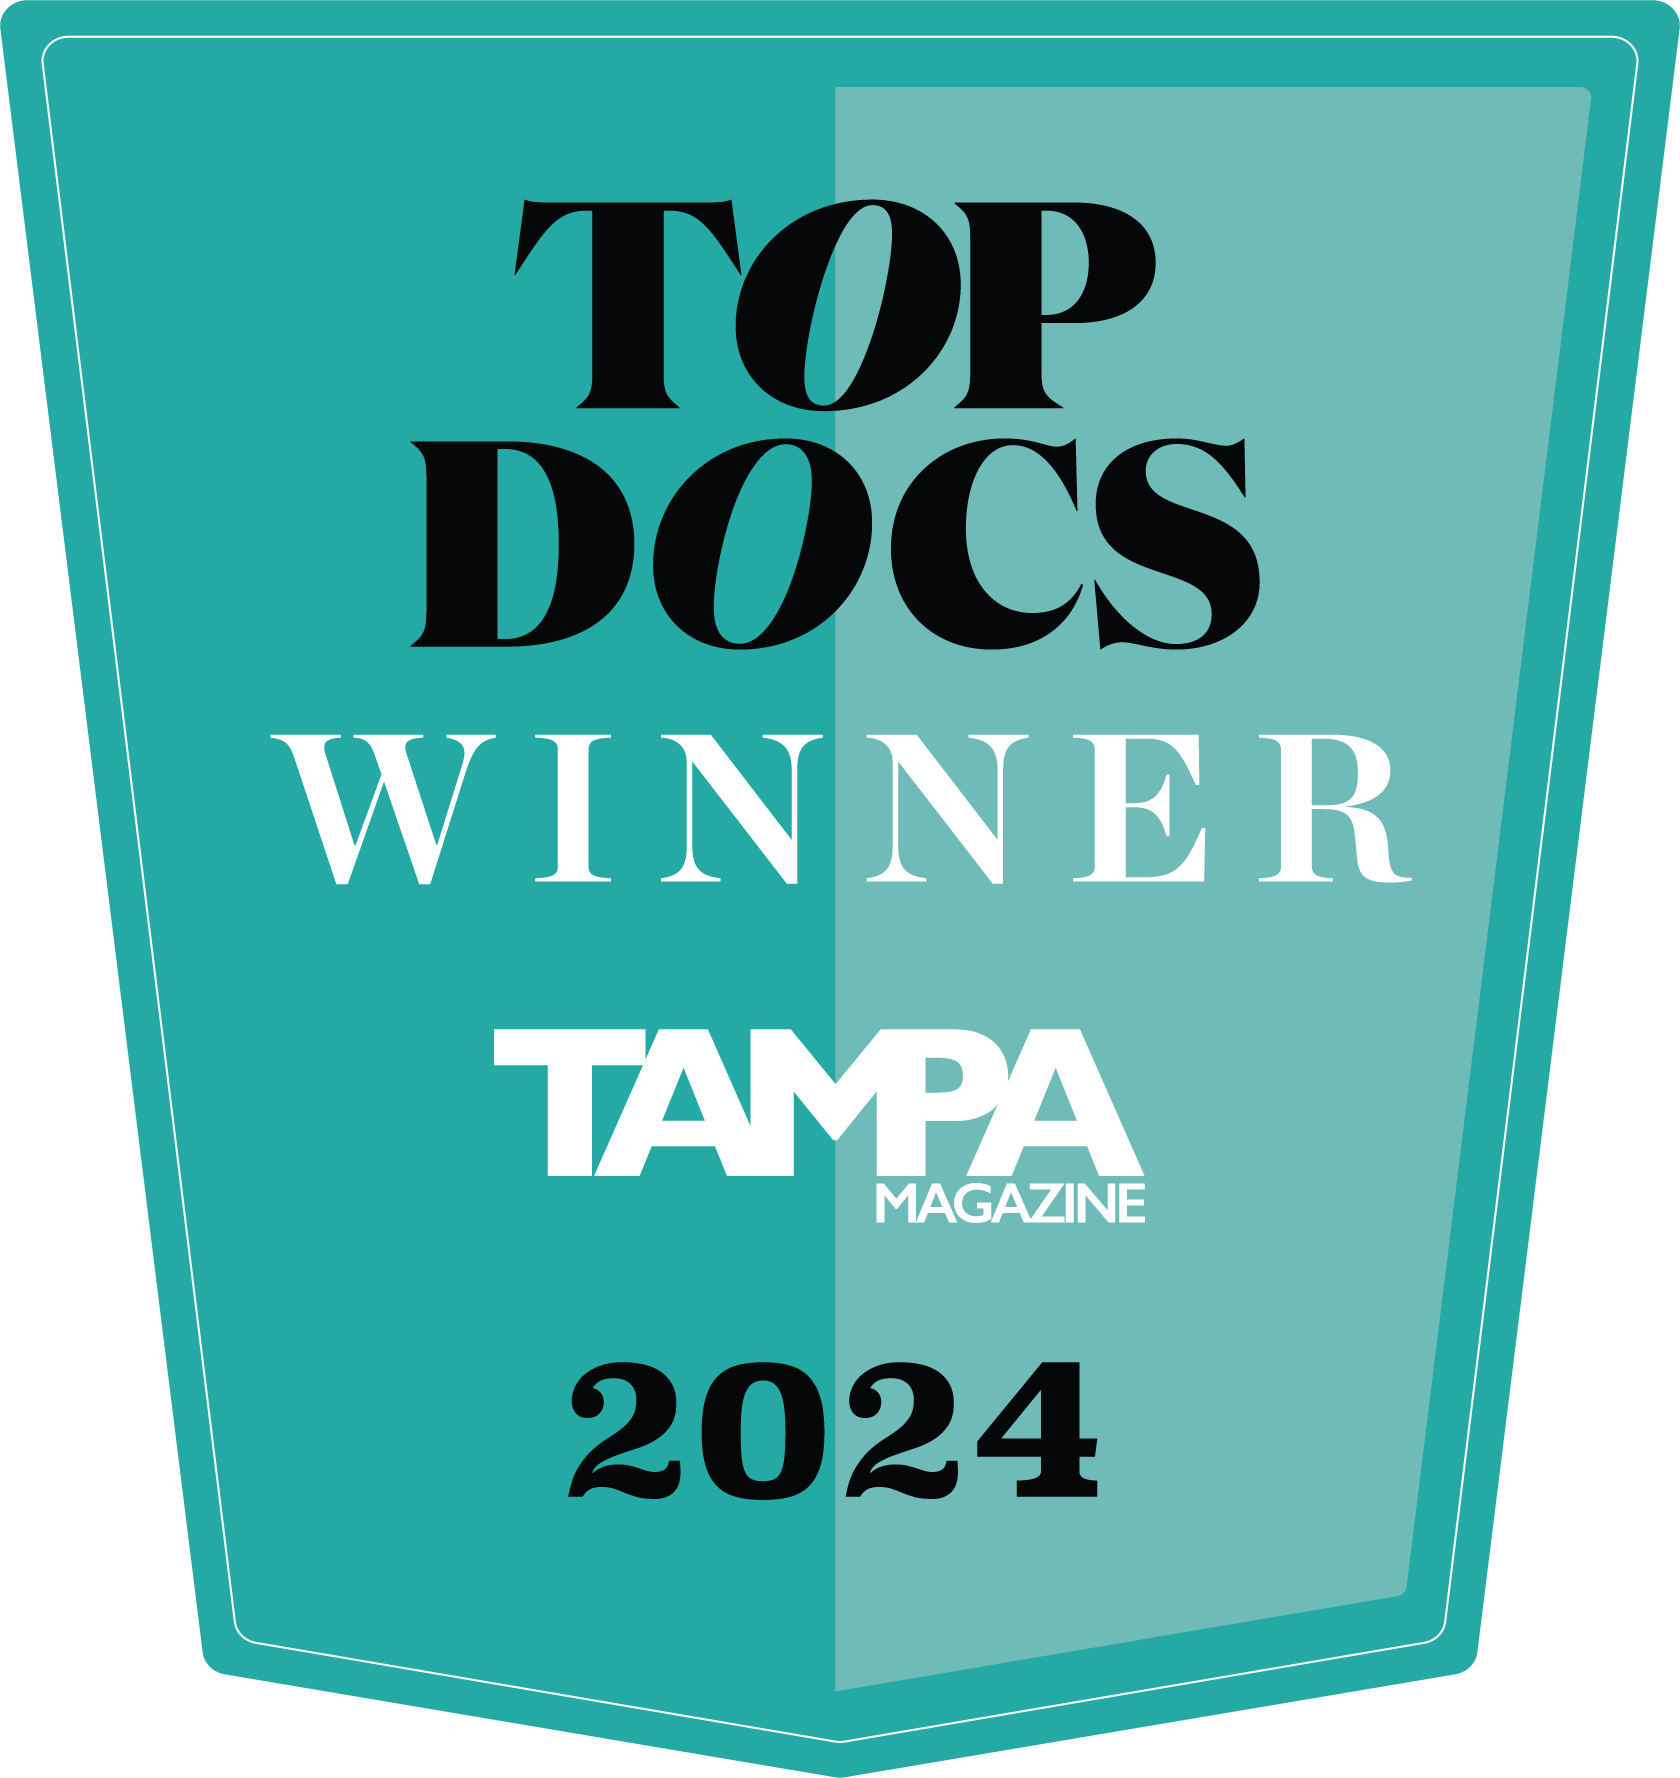 Top Tampa Cardiologist